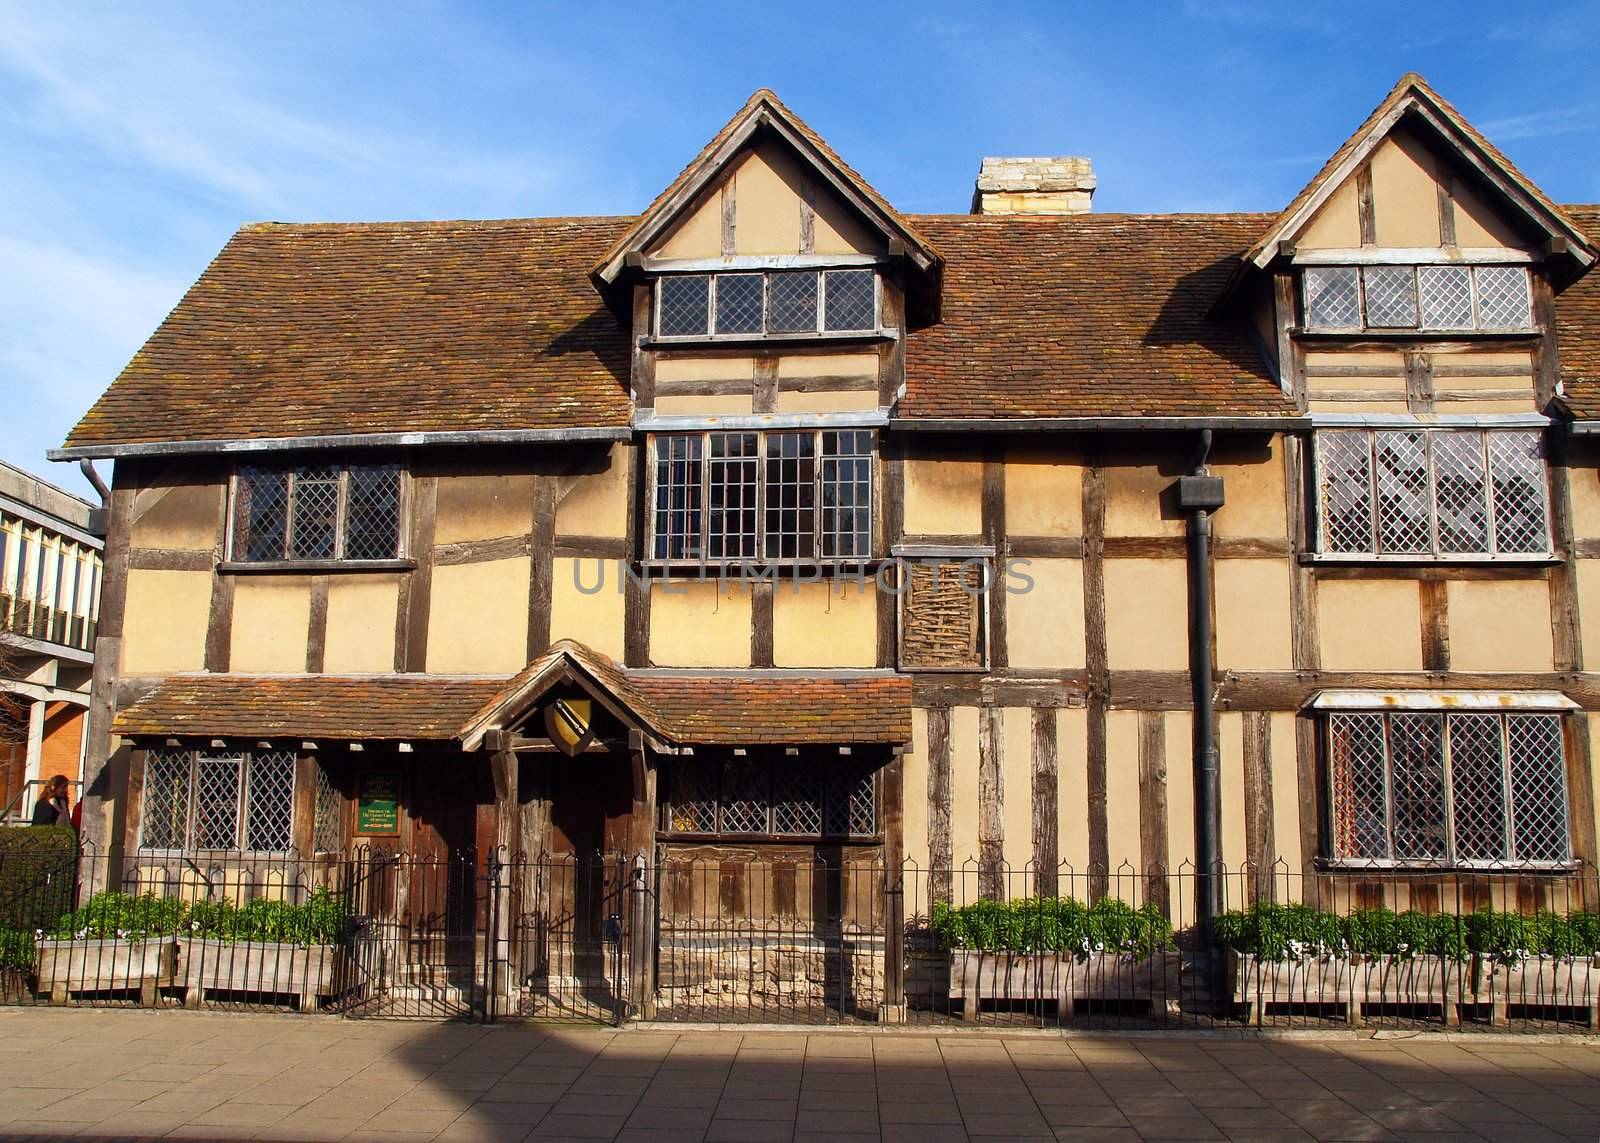 The Stratford shakespeares birthplace by gary718